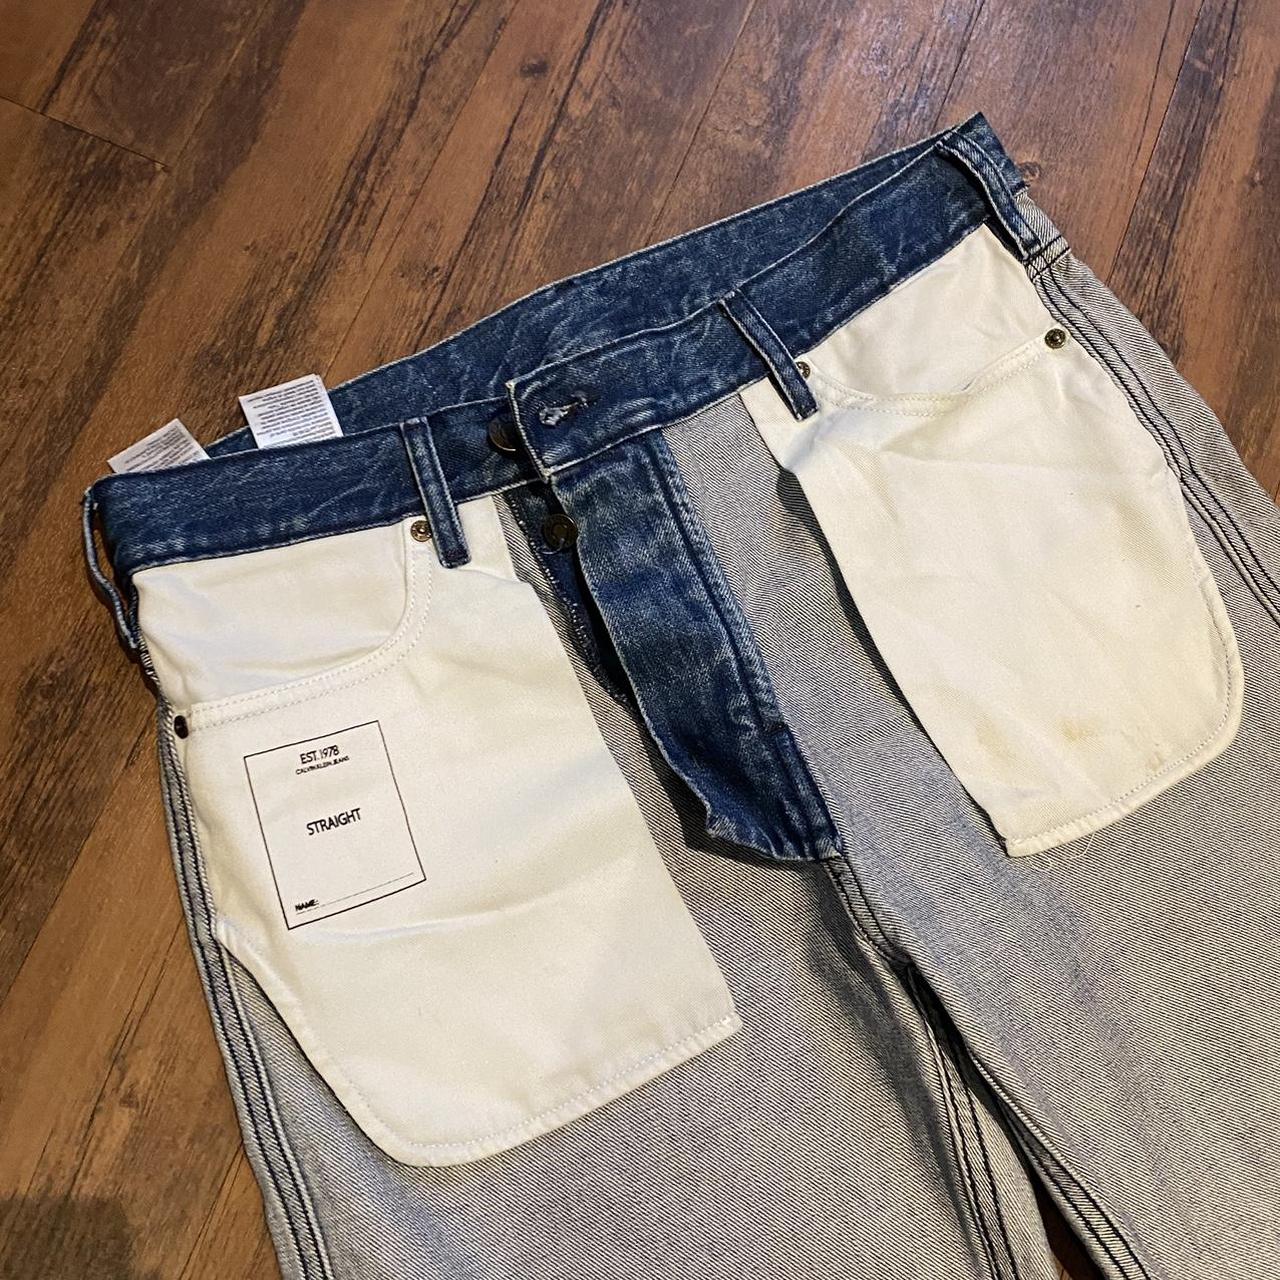 PENGEST Calvin Klein inside-out jeans - only selling... - Depop